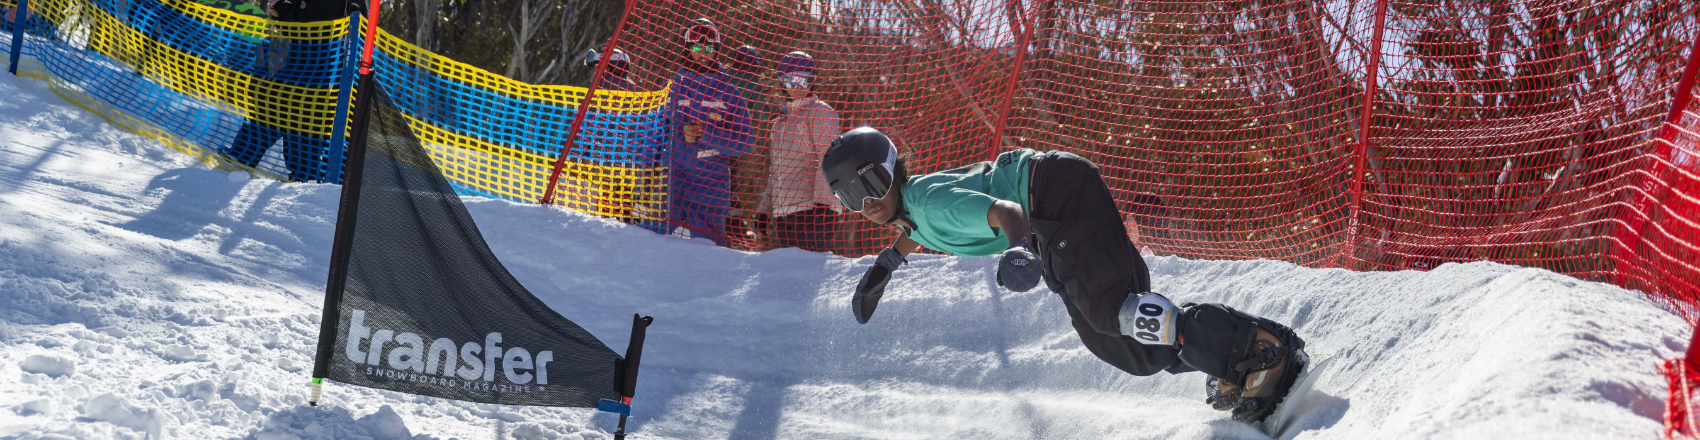 Picture of Transfer Banked Slalom